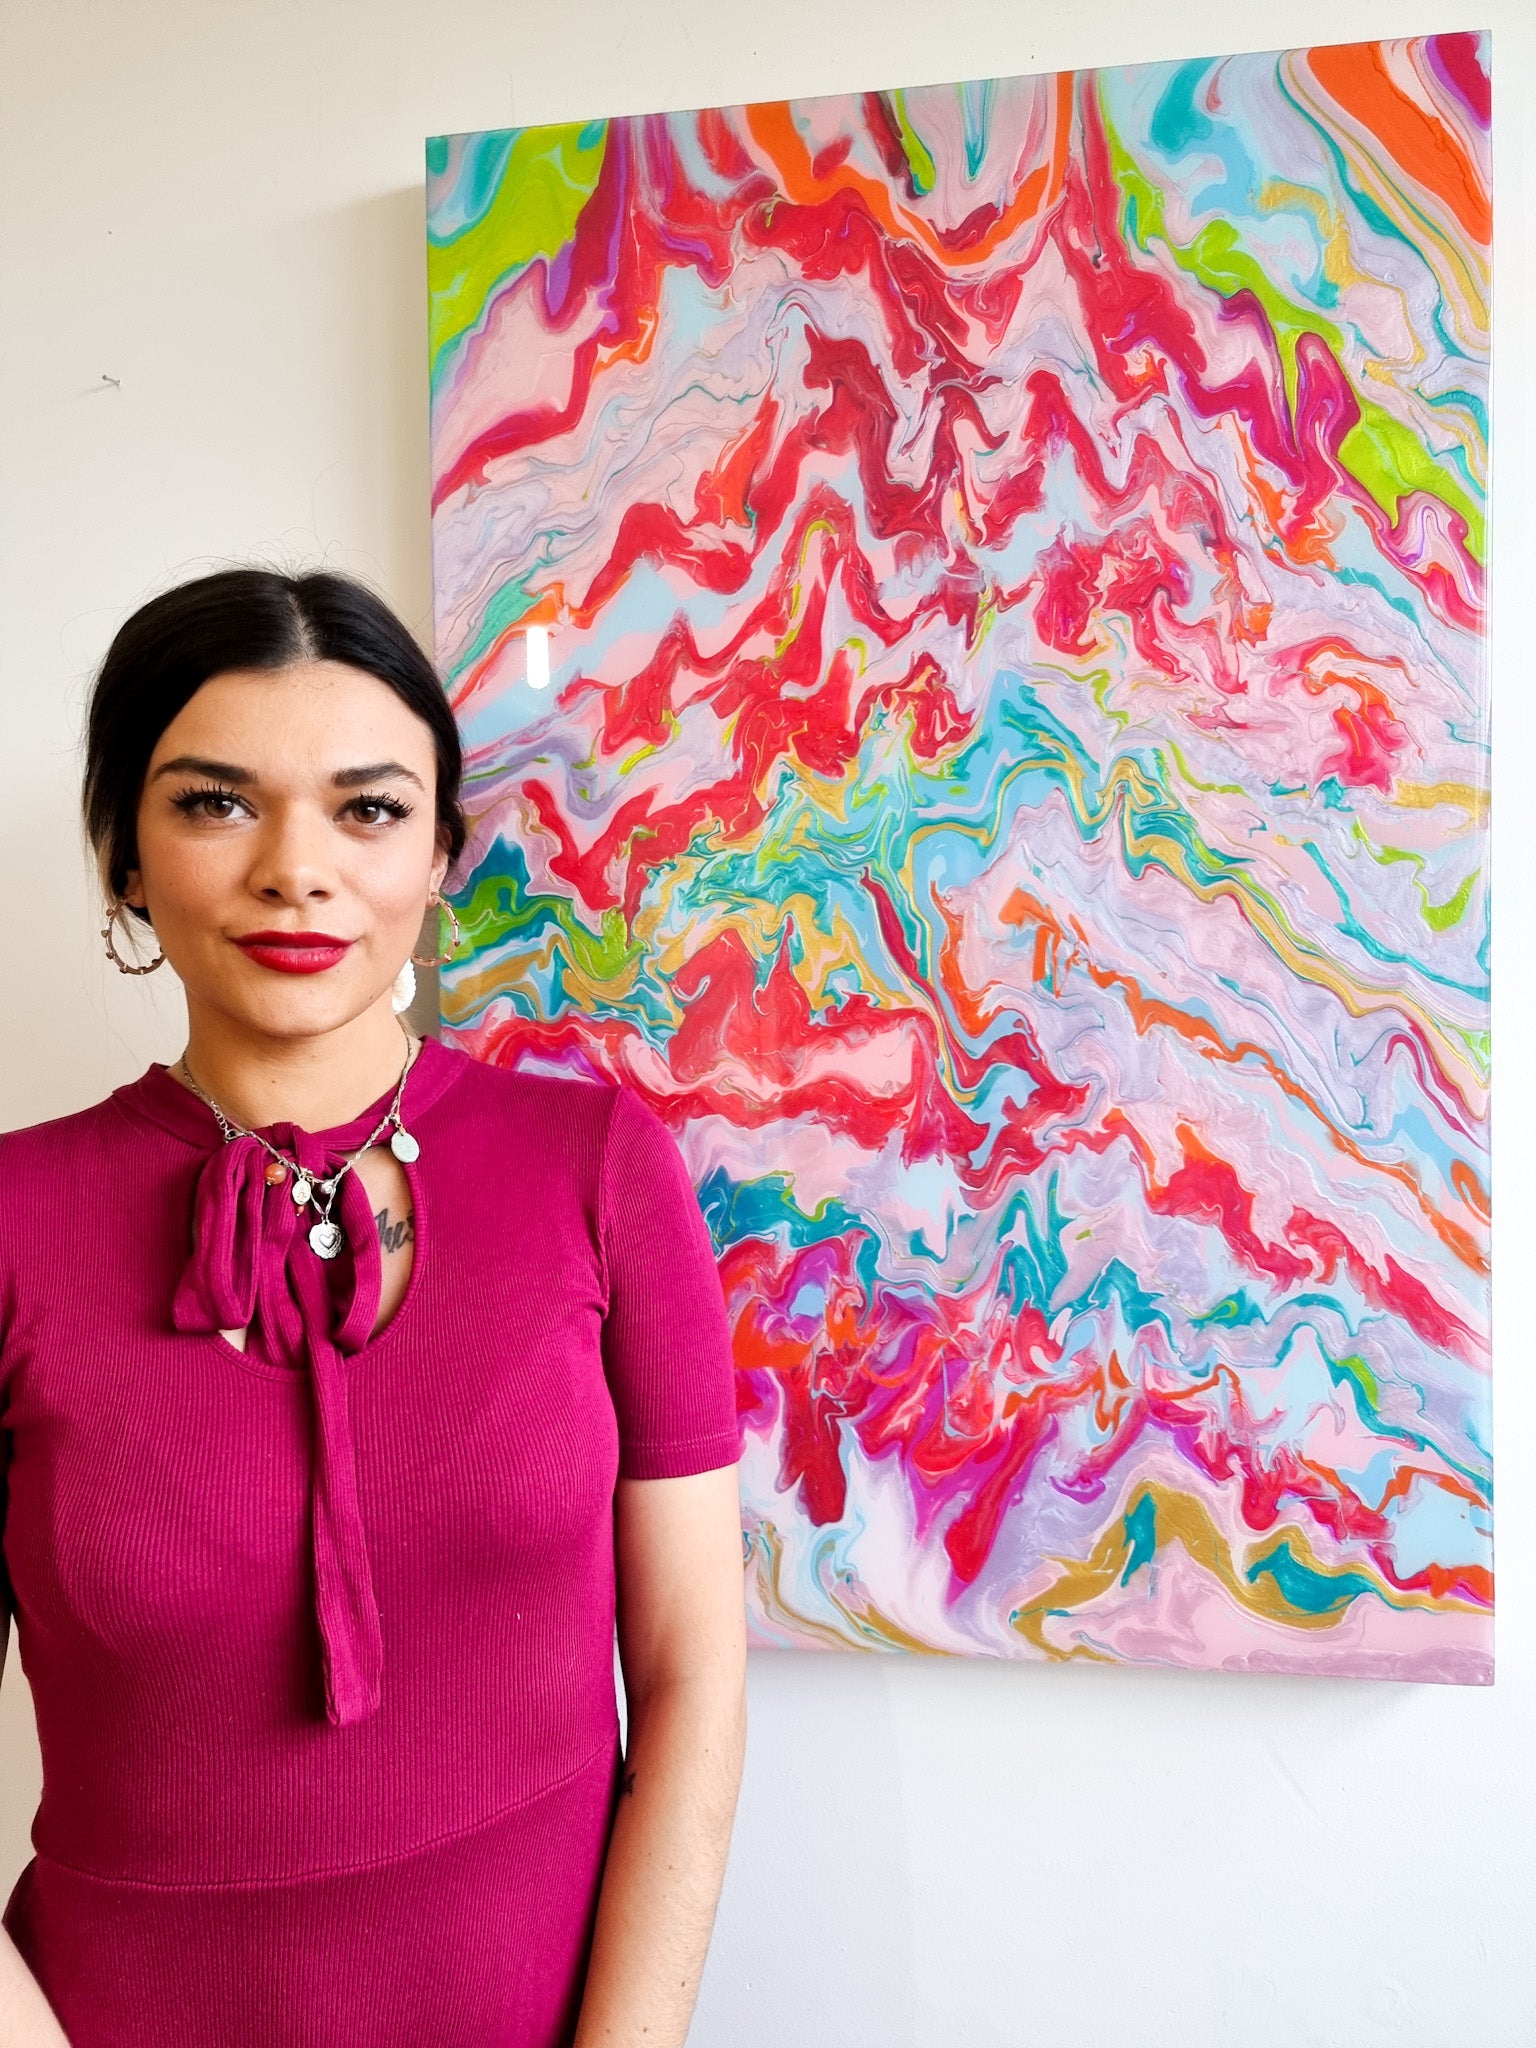 Female artist standing next to abstract pink painting